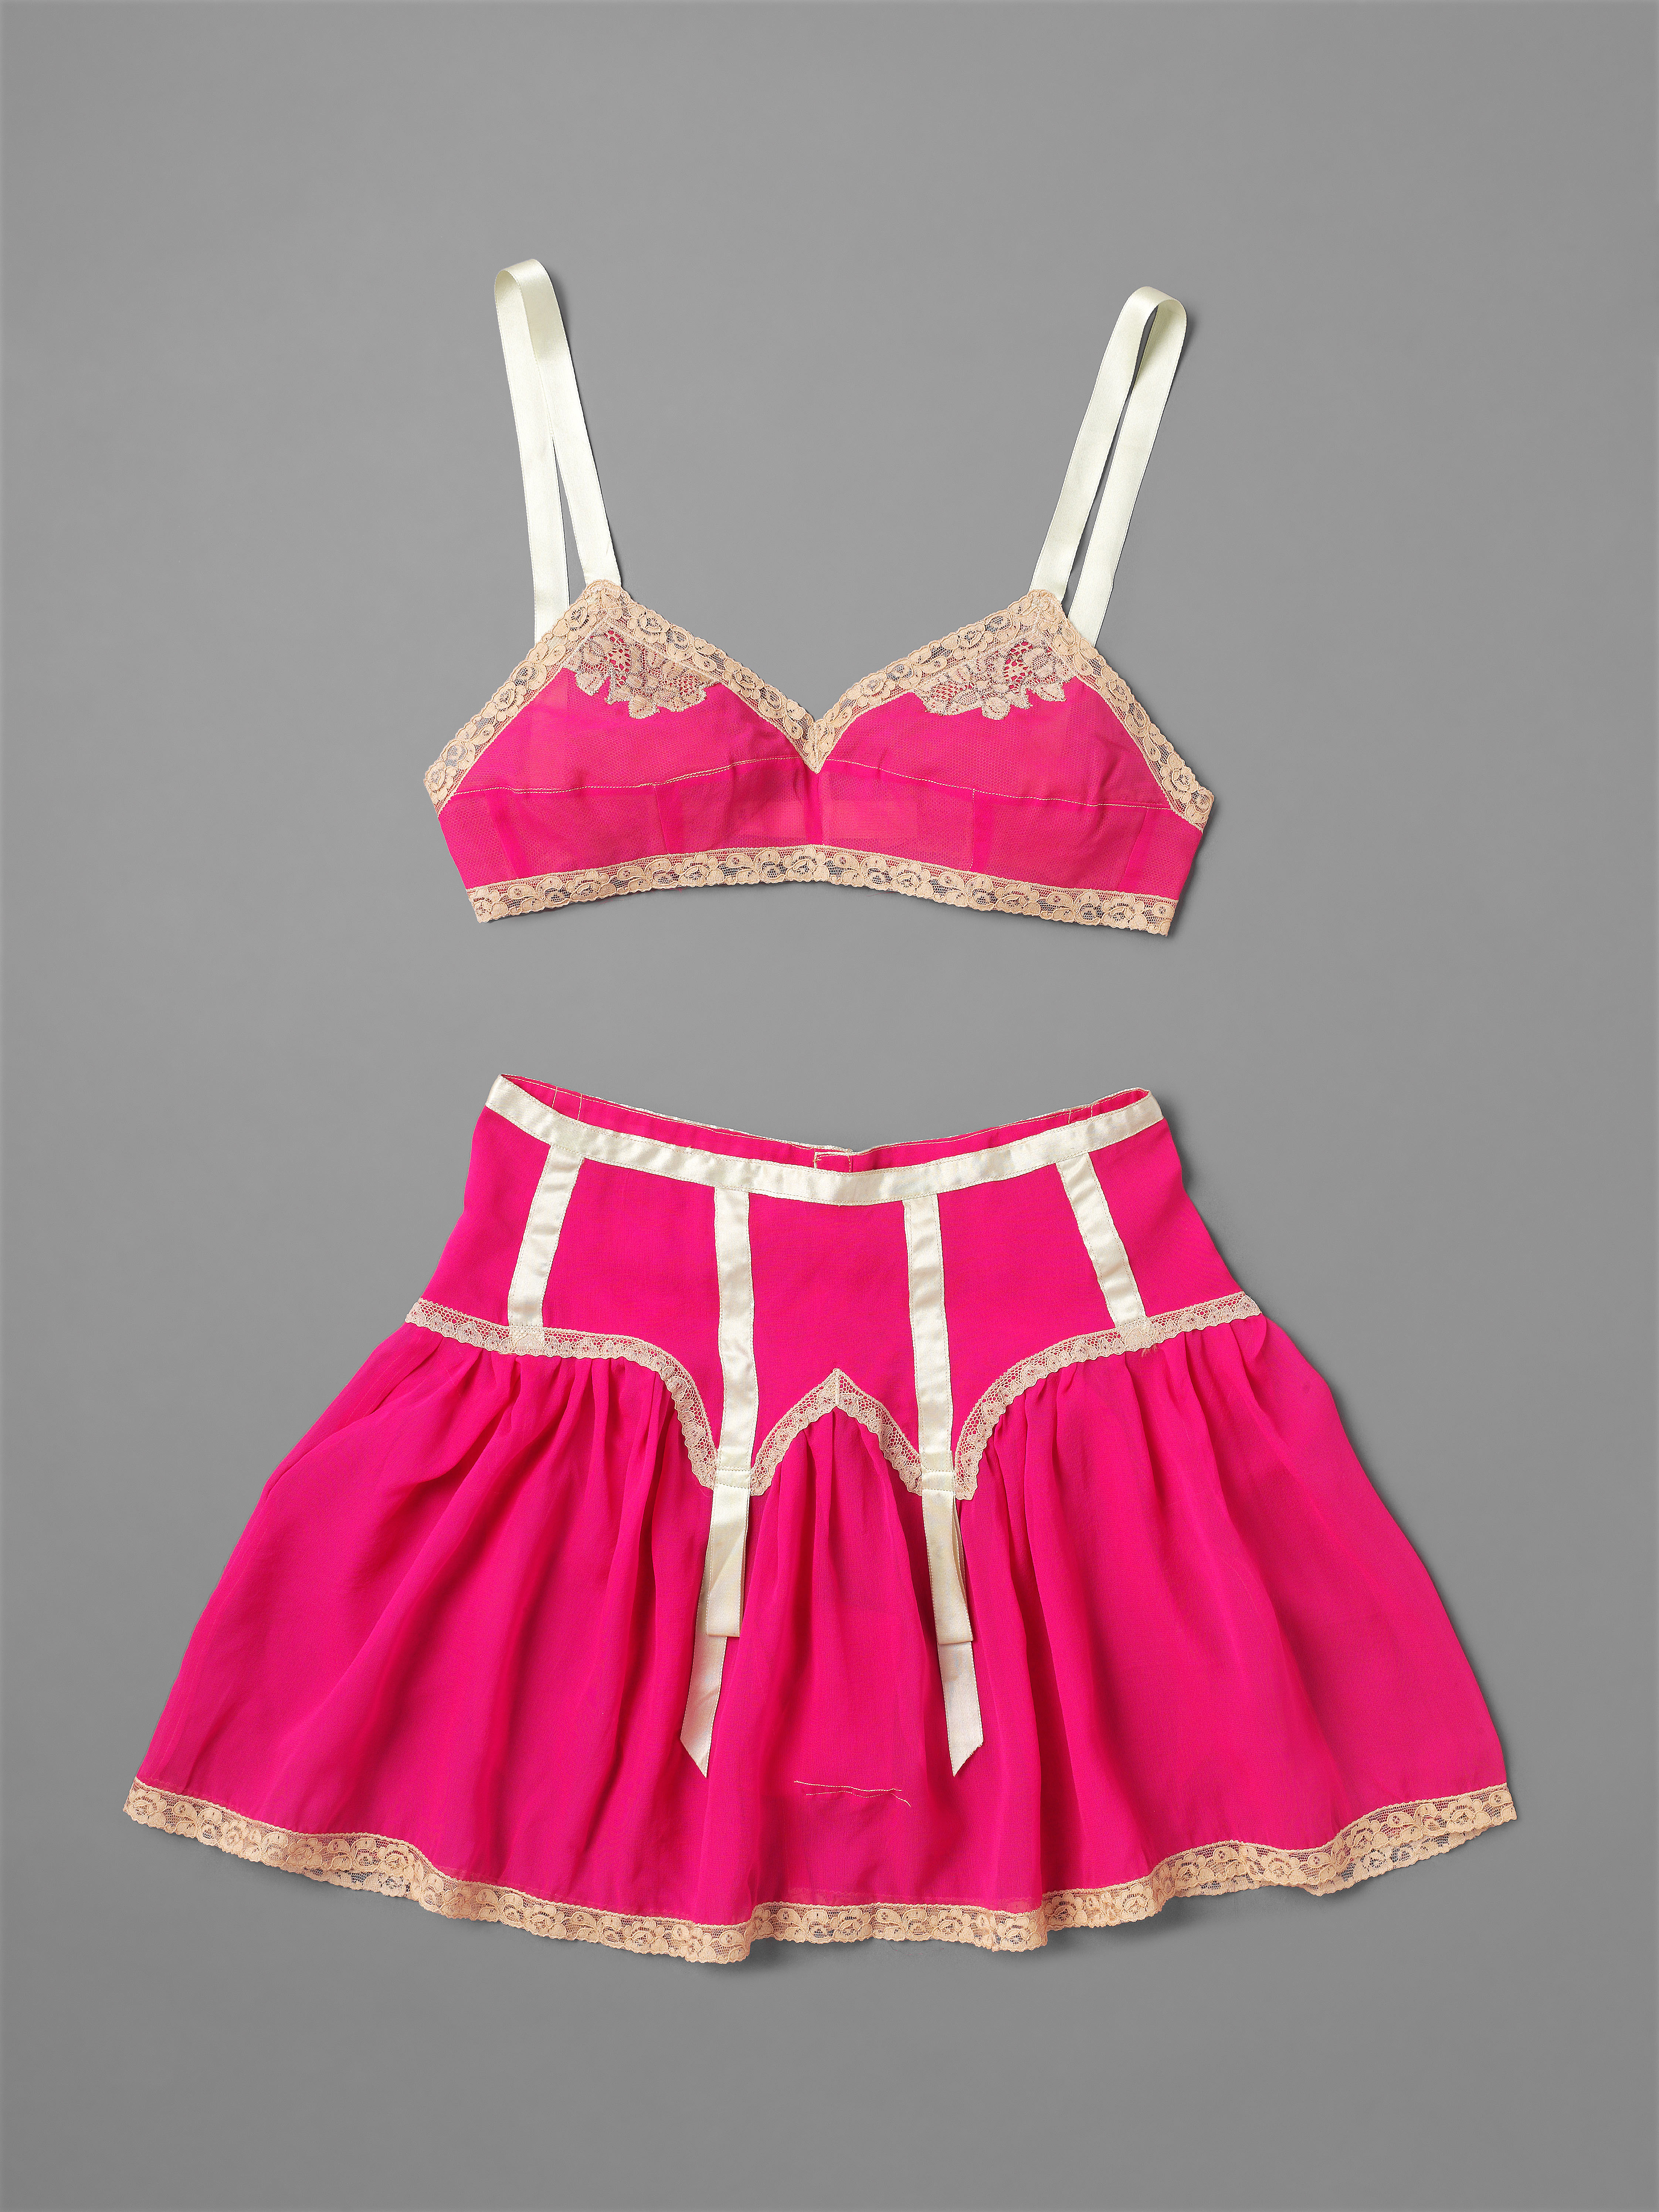 https://www.thejohnbrightcollection.co.uk/wp-content/uploads/2017/01/Bra-and-knickers-set-1930s-1.jpg